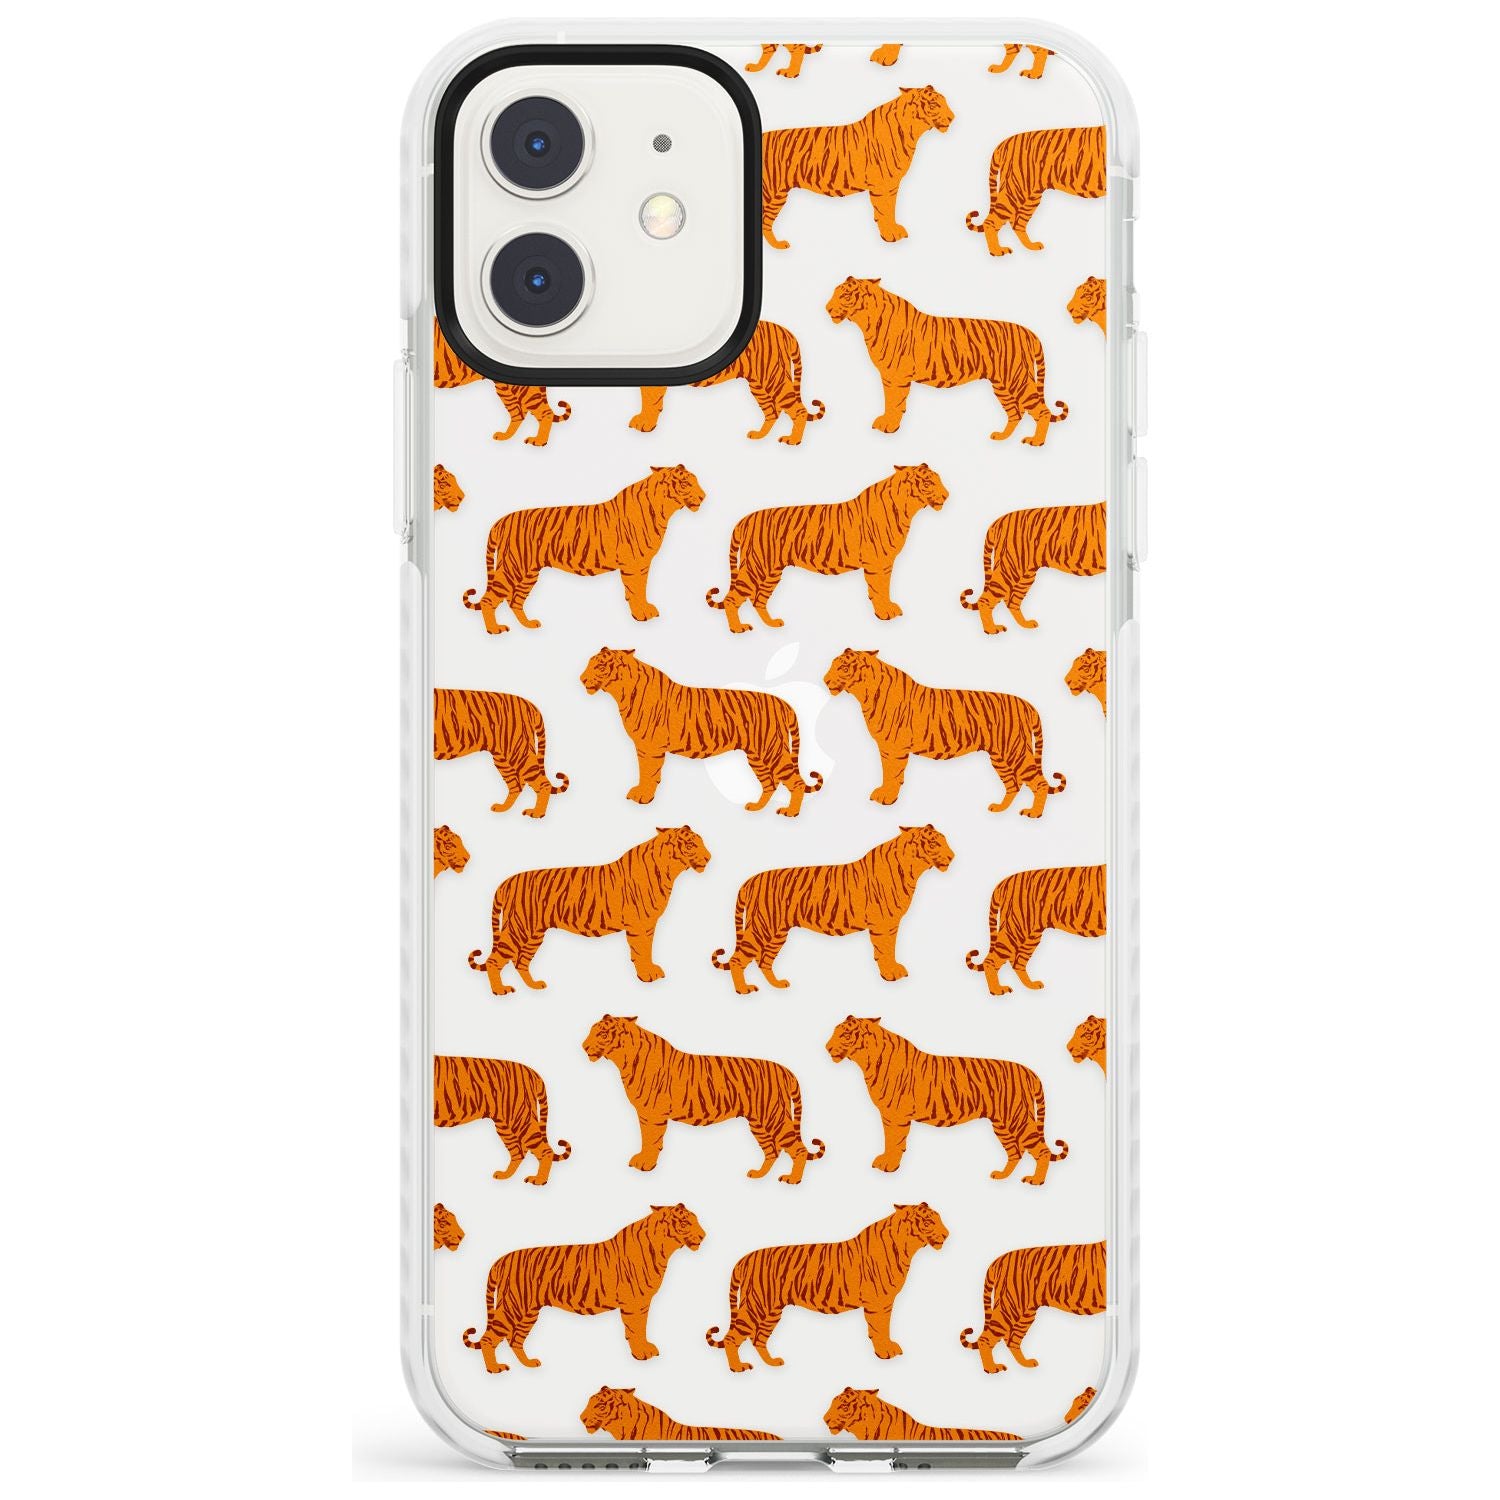 Tigers on Clear Pattern Impact Phone Case for iPhone 11